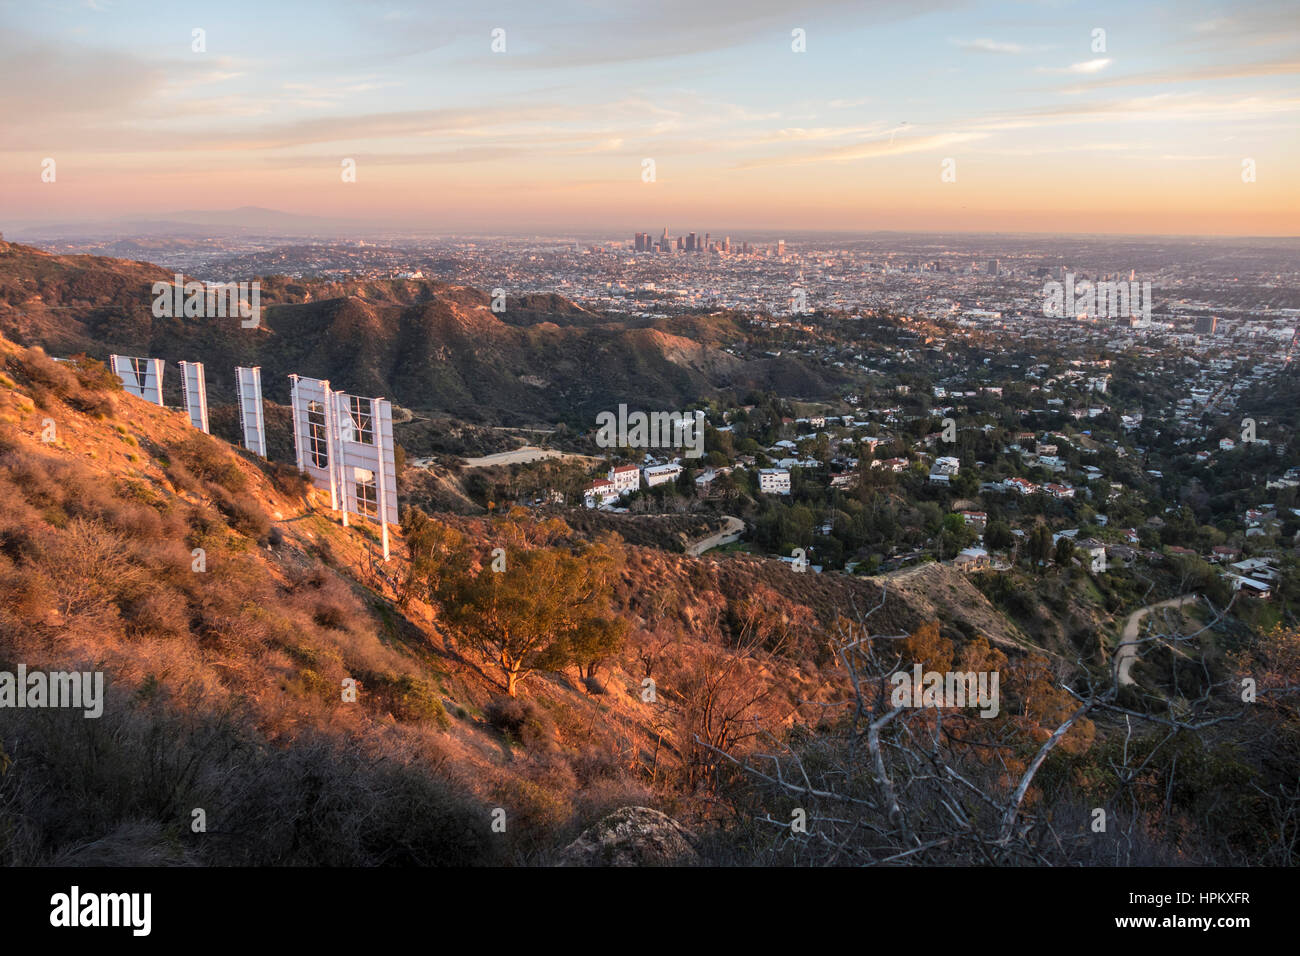 Los Angeles, California, USA - February 4, 2016:  Hollywood sign and downtown Los Angeles dusk cityscape view. Stock Photo